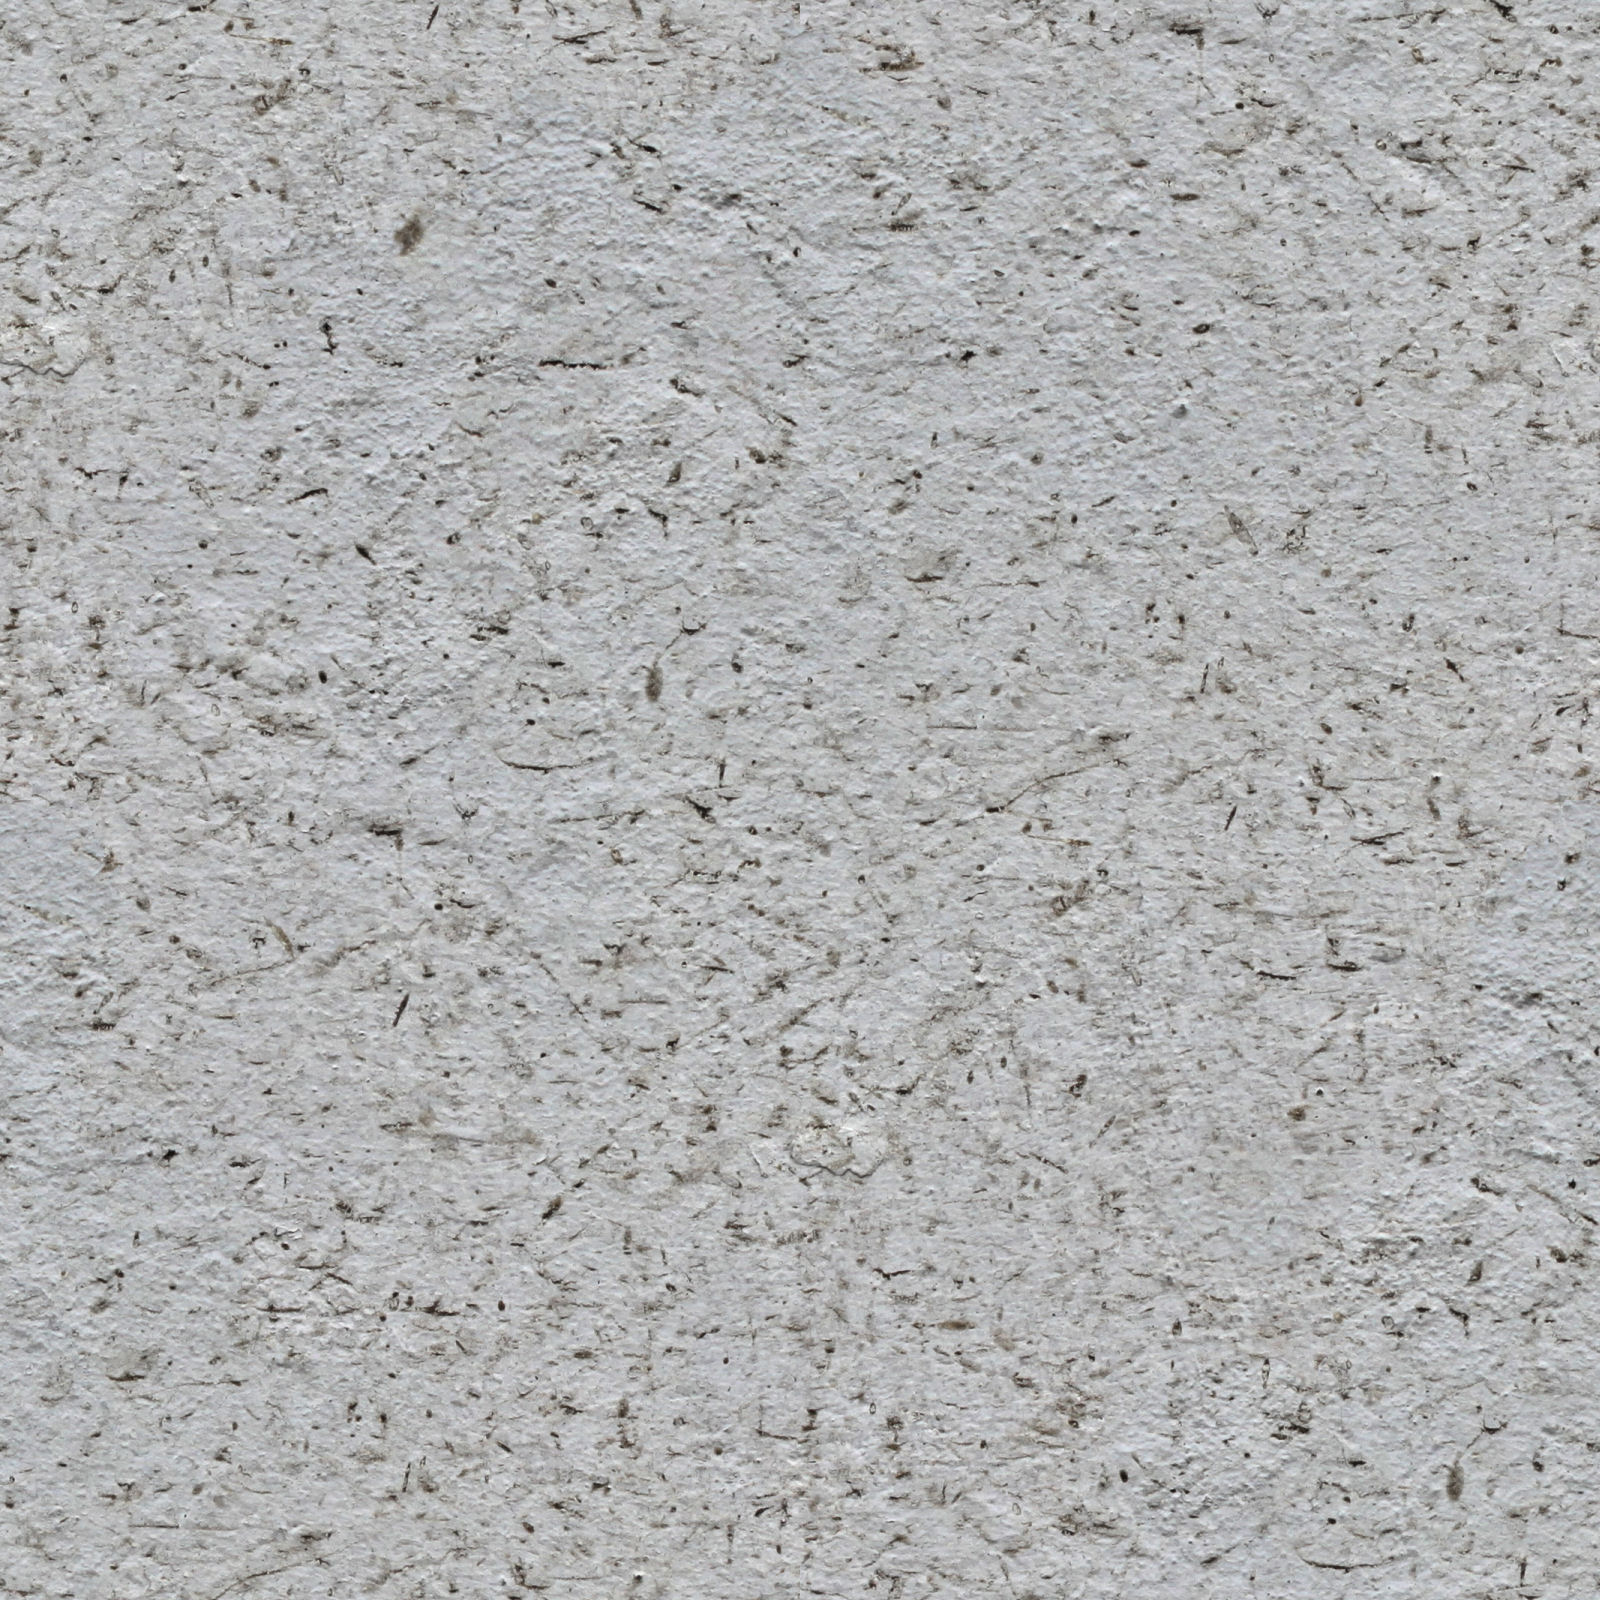 High Resolution Seamless Textures: Seamless white wall texture with dirt